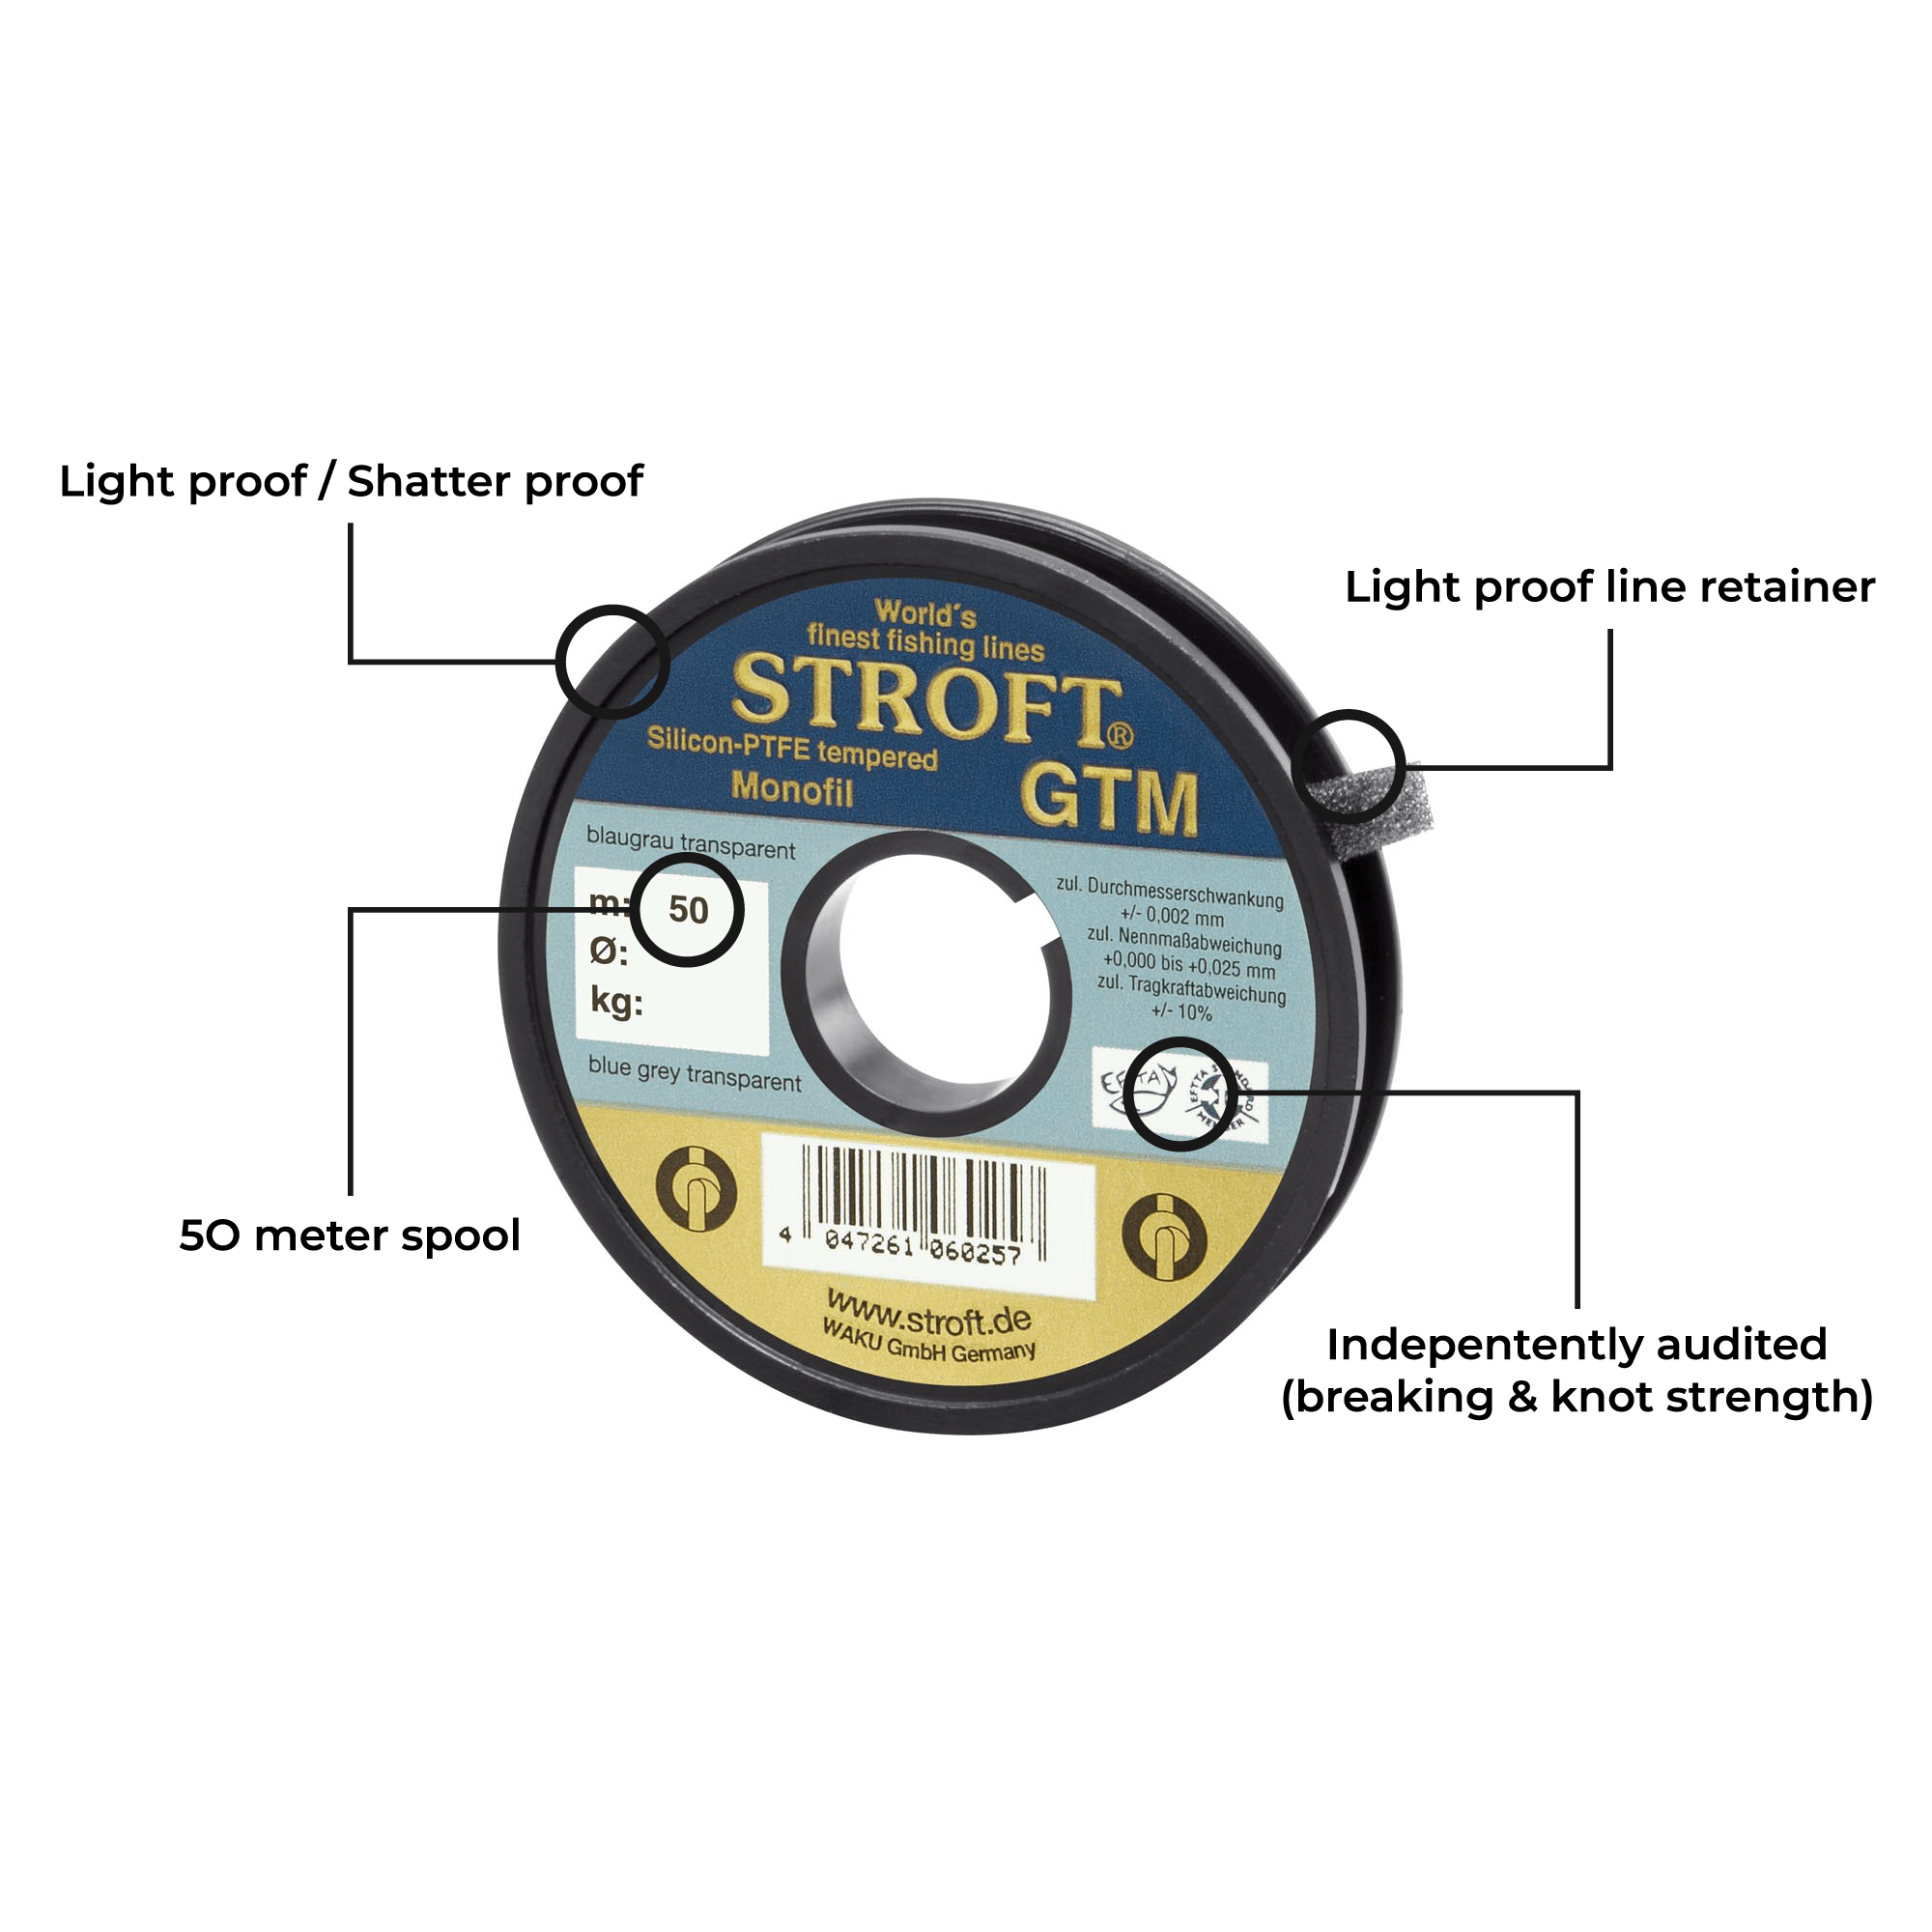 Stroft GTM Tippet | 50 Meter Spools | High-Strength & Controlled-Stretch | Different Variations Available